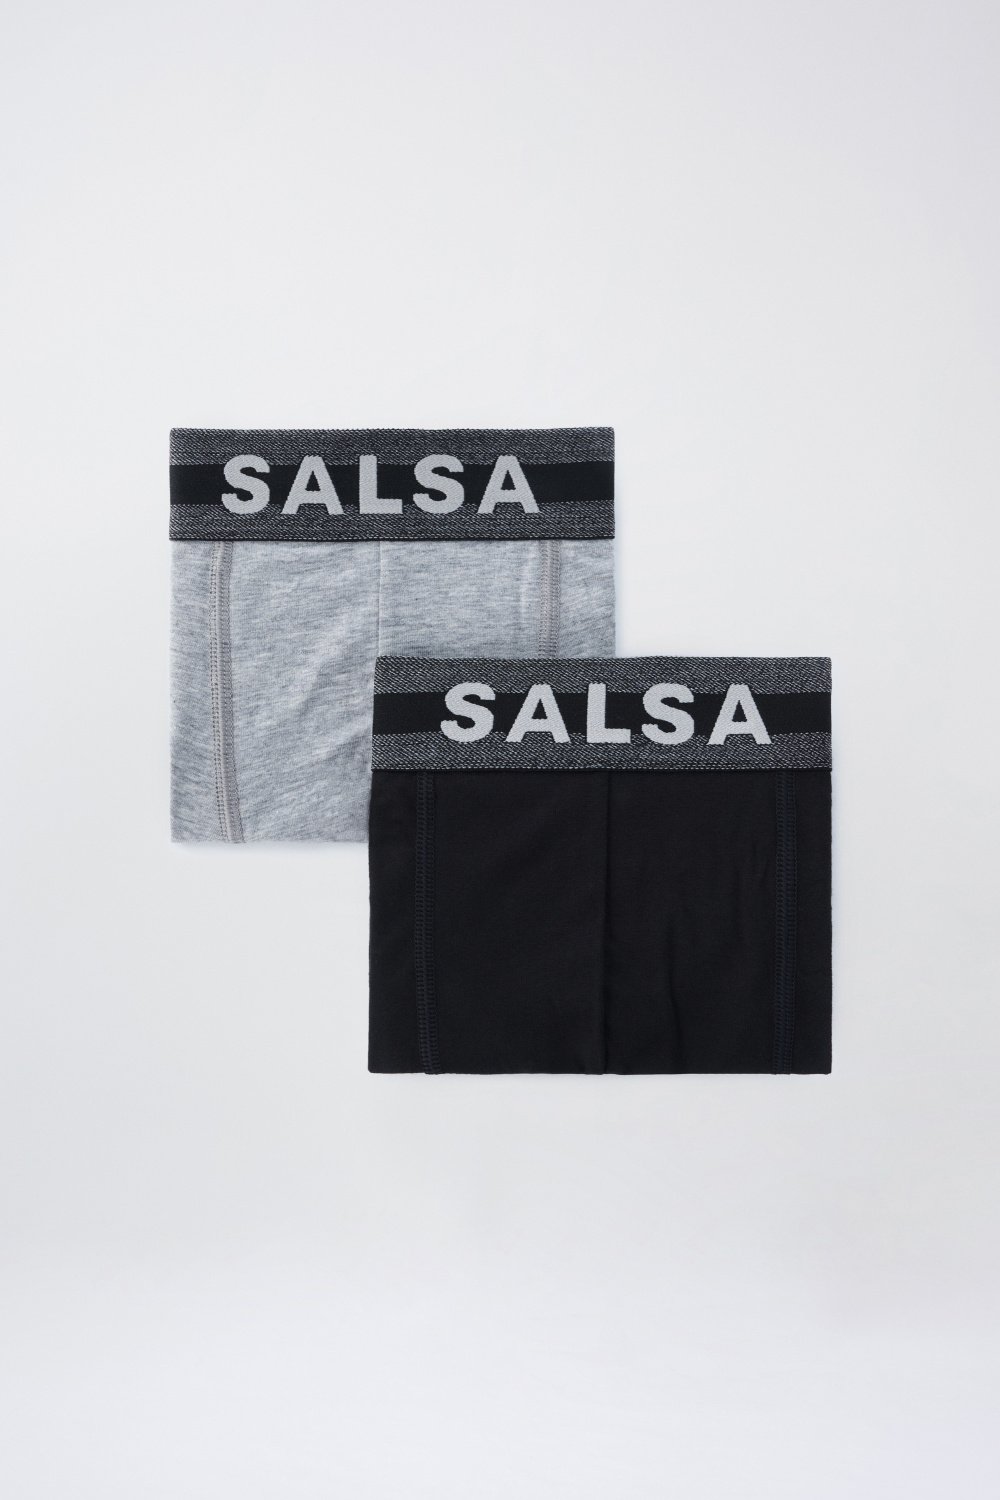 Pack of 2 boxers - Salsa